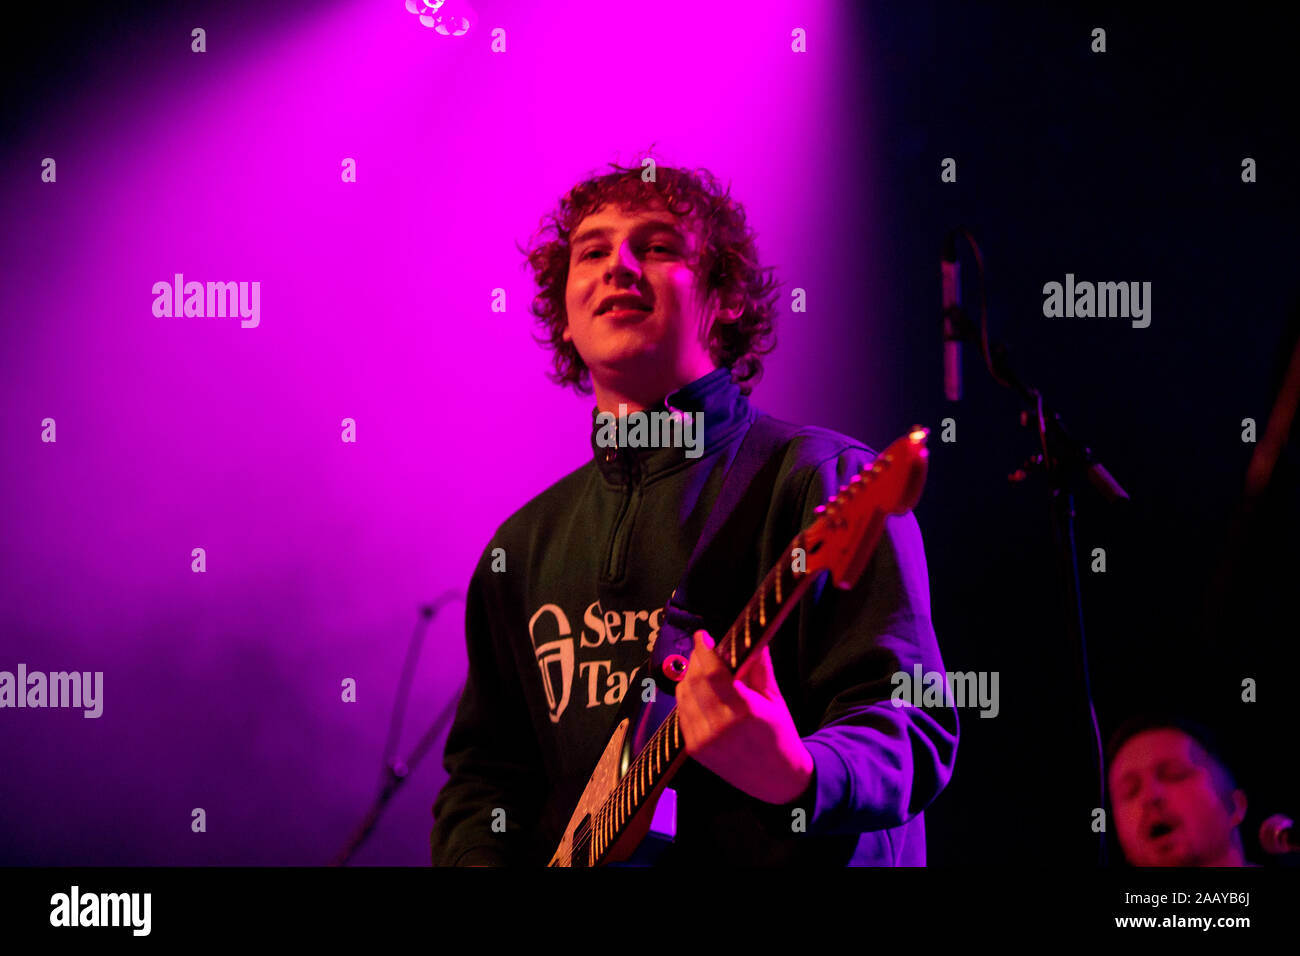 Manchester, UK. 23rd November, 2019. Scottish band The Snuts perform live at Manchester Academy 1 supporting Lewis Capaldi in a sold out show. Stock Photo